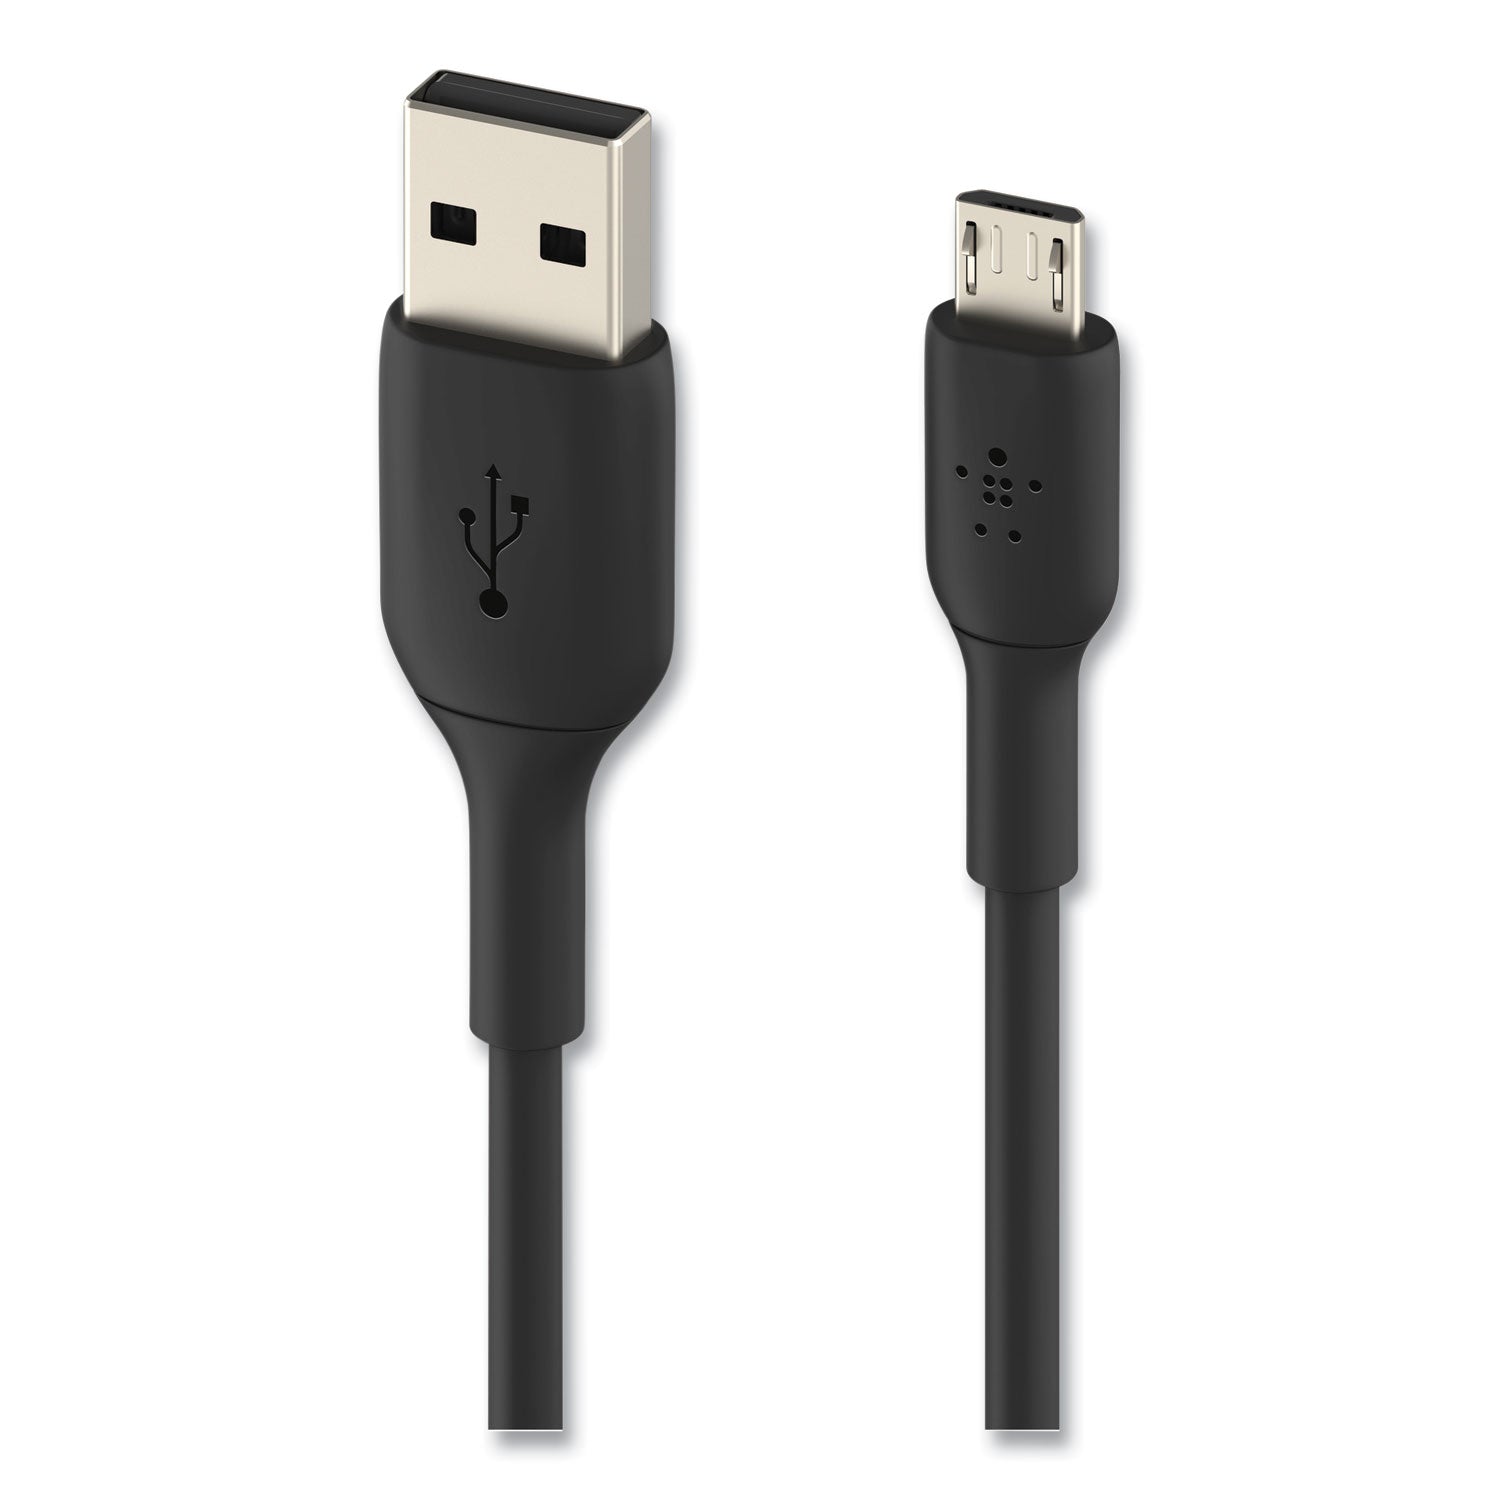 boost-charge-usb-a-to-micro-usb-chargesync-cable-33-ft-black_blkcab005bt1mbk - 1